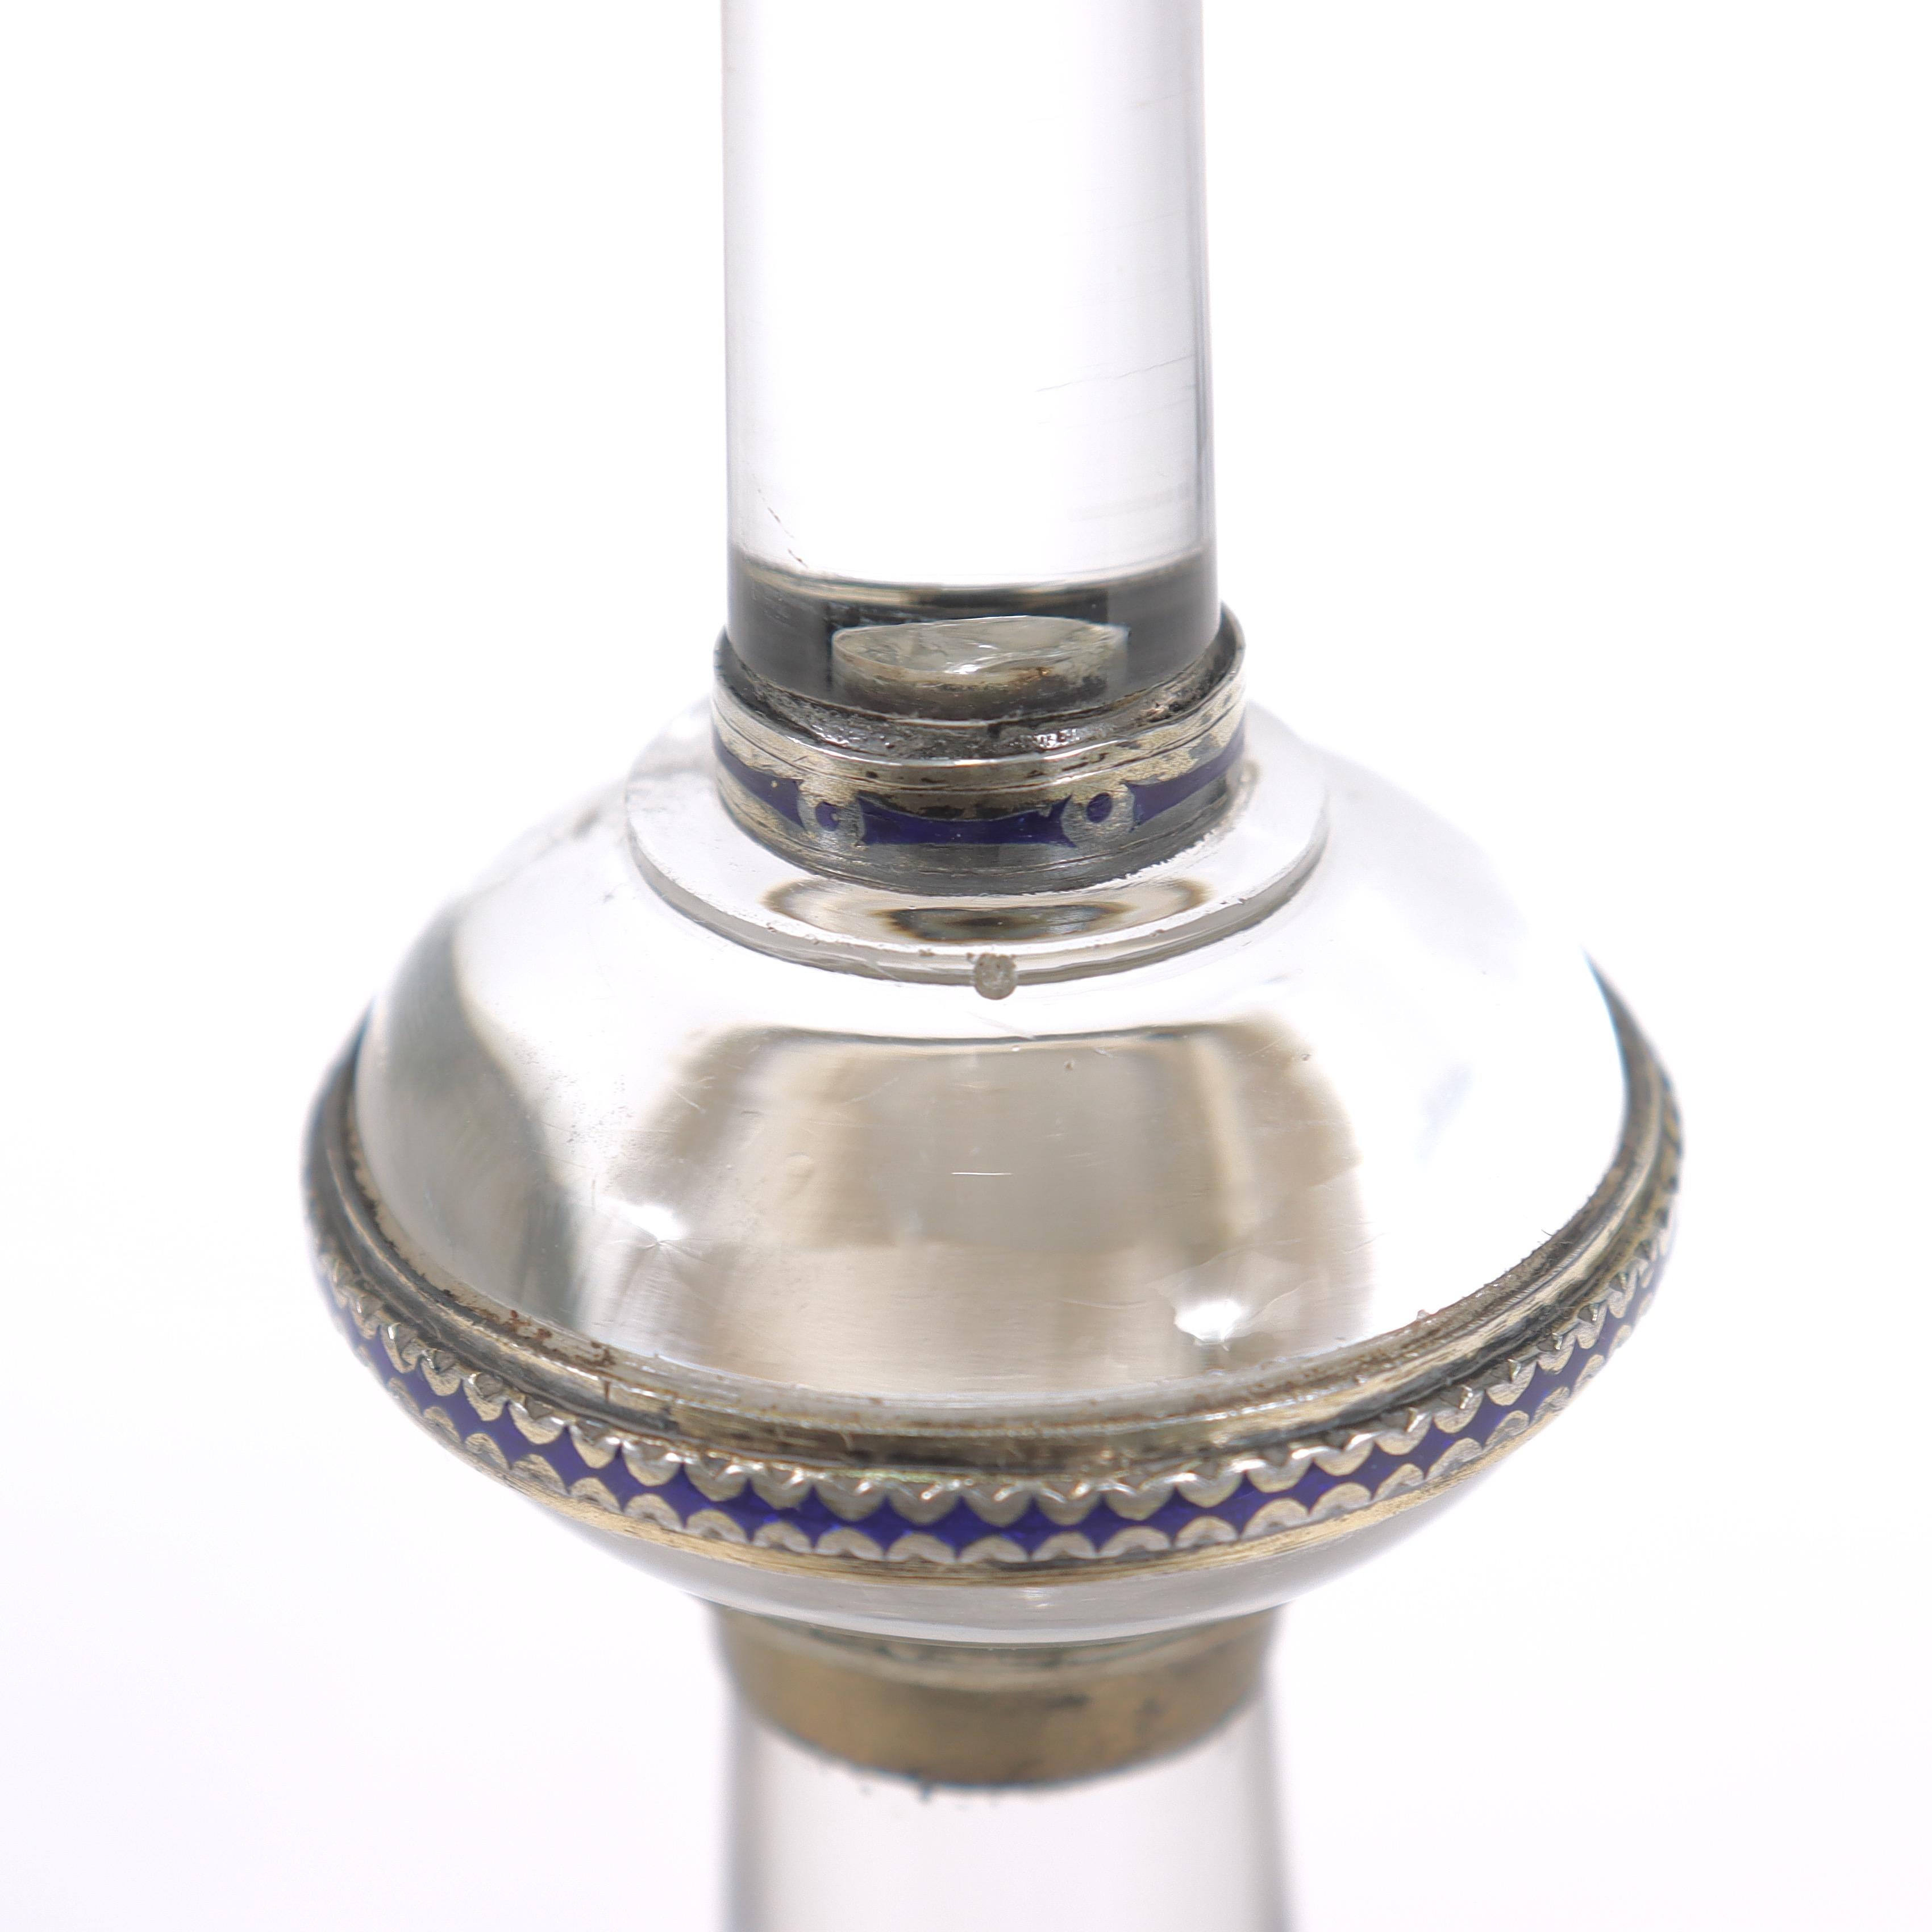 Antique Austrian Rock Crystal, Silver, and Blue Enamel Pricket Candlestick For Sale 4